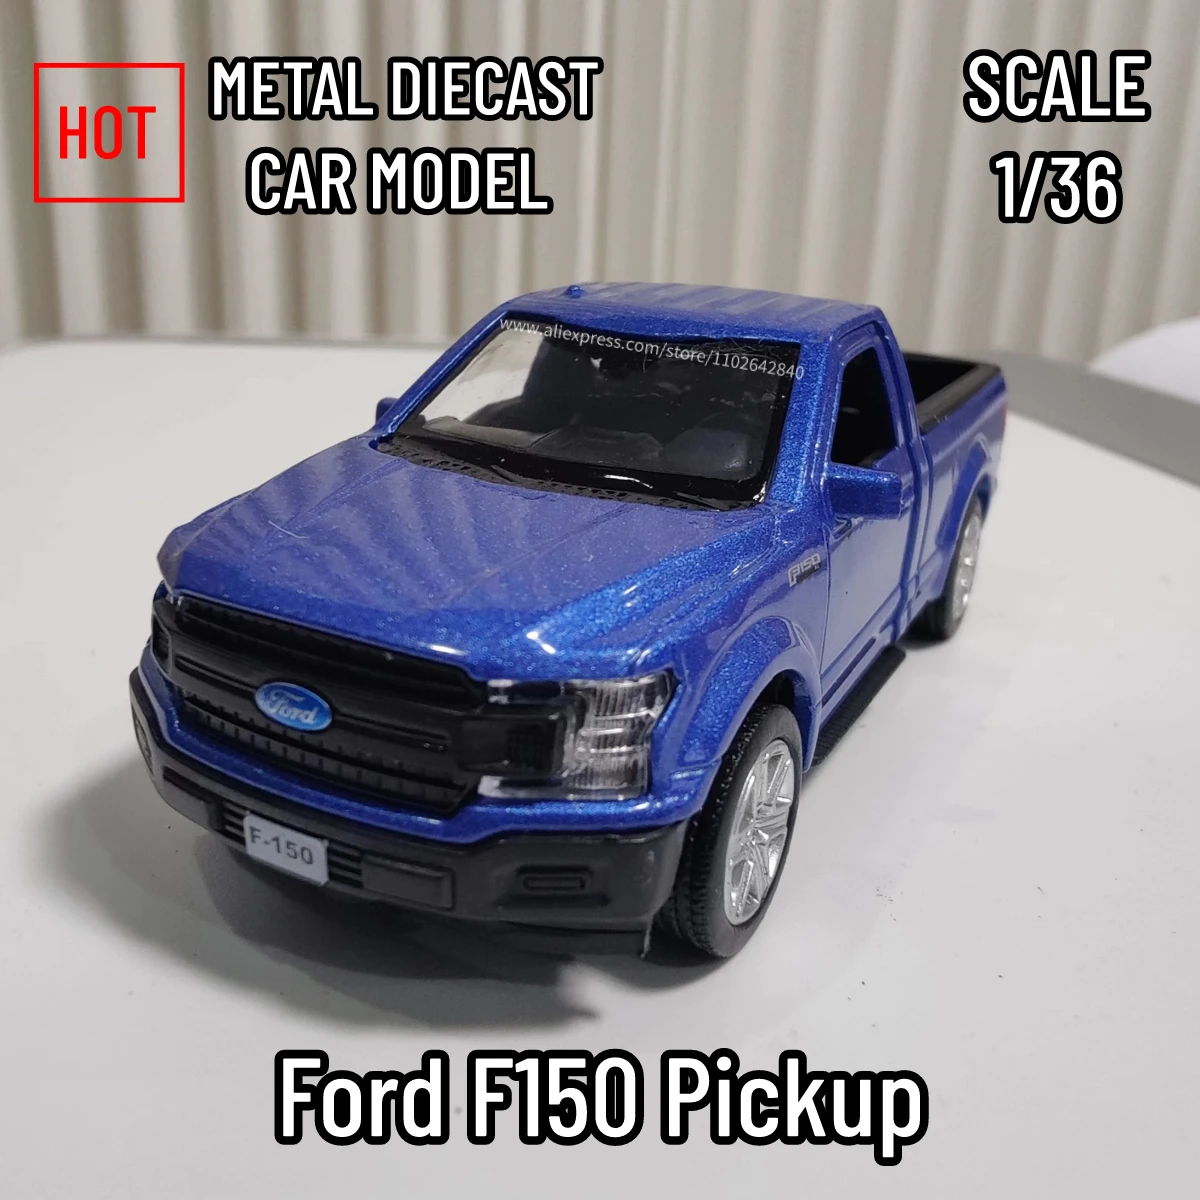 1/36 Scale Ford F150 Pickup Truck Car Model Replica Diecast Collection Vehicle Interior Decor Ornament Xmas Gift Kid Boy Toy jada just trucks 1 24 scale 2020 jeep gladiator dealertrack pickup vehicle offroad car amry model diecast toy furious souvenir